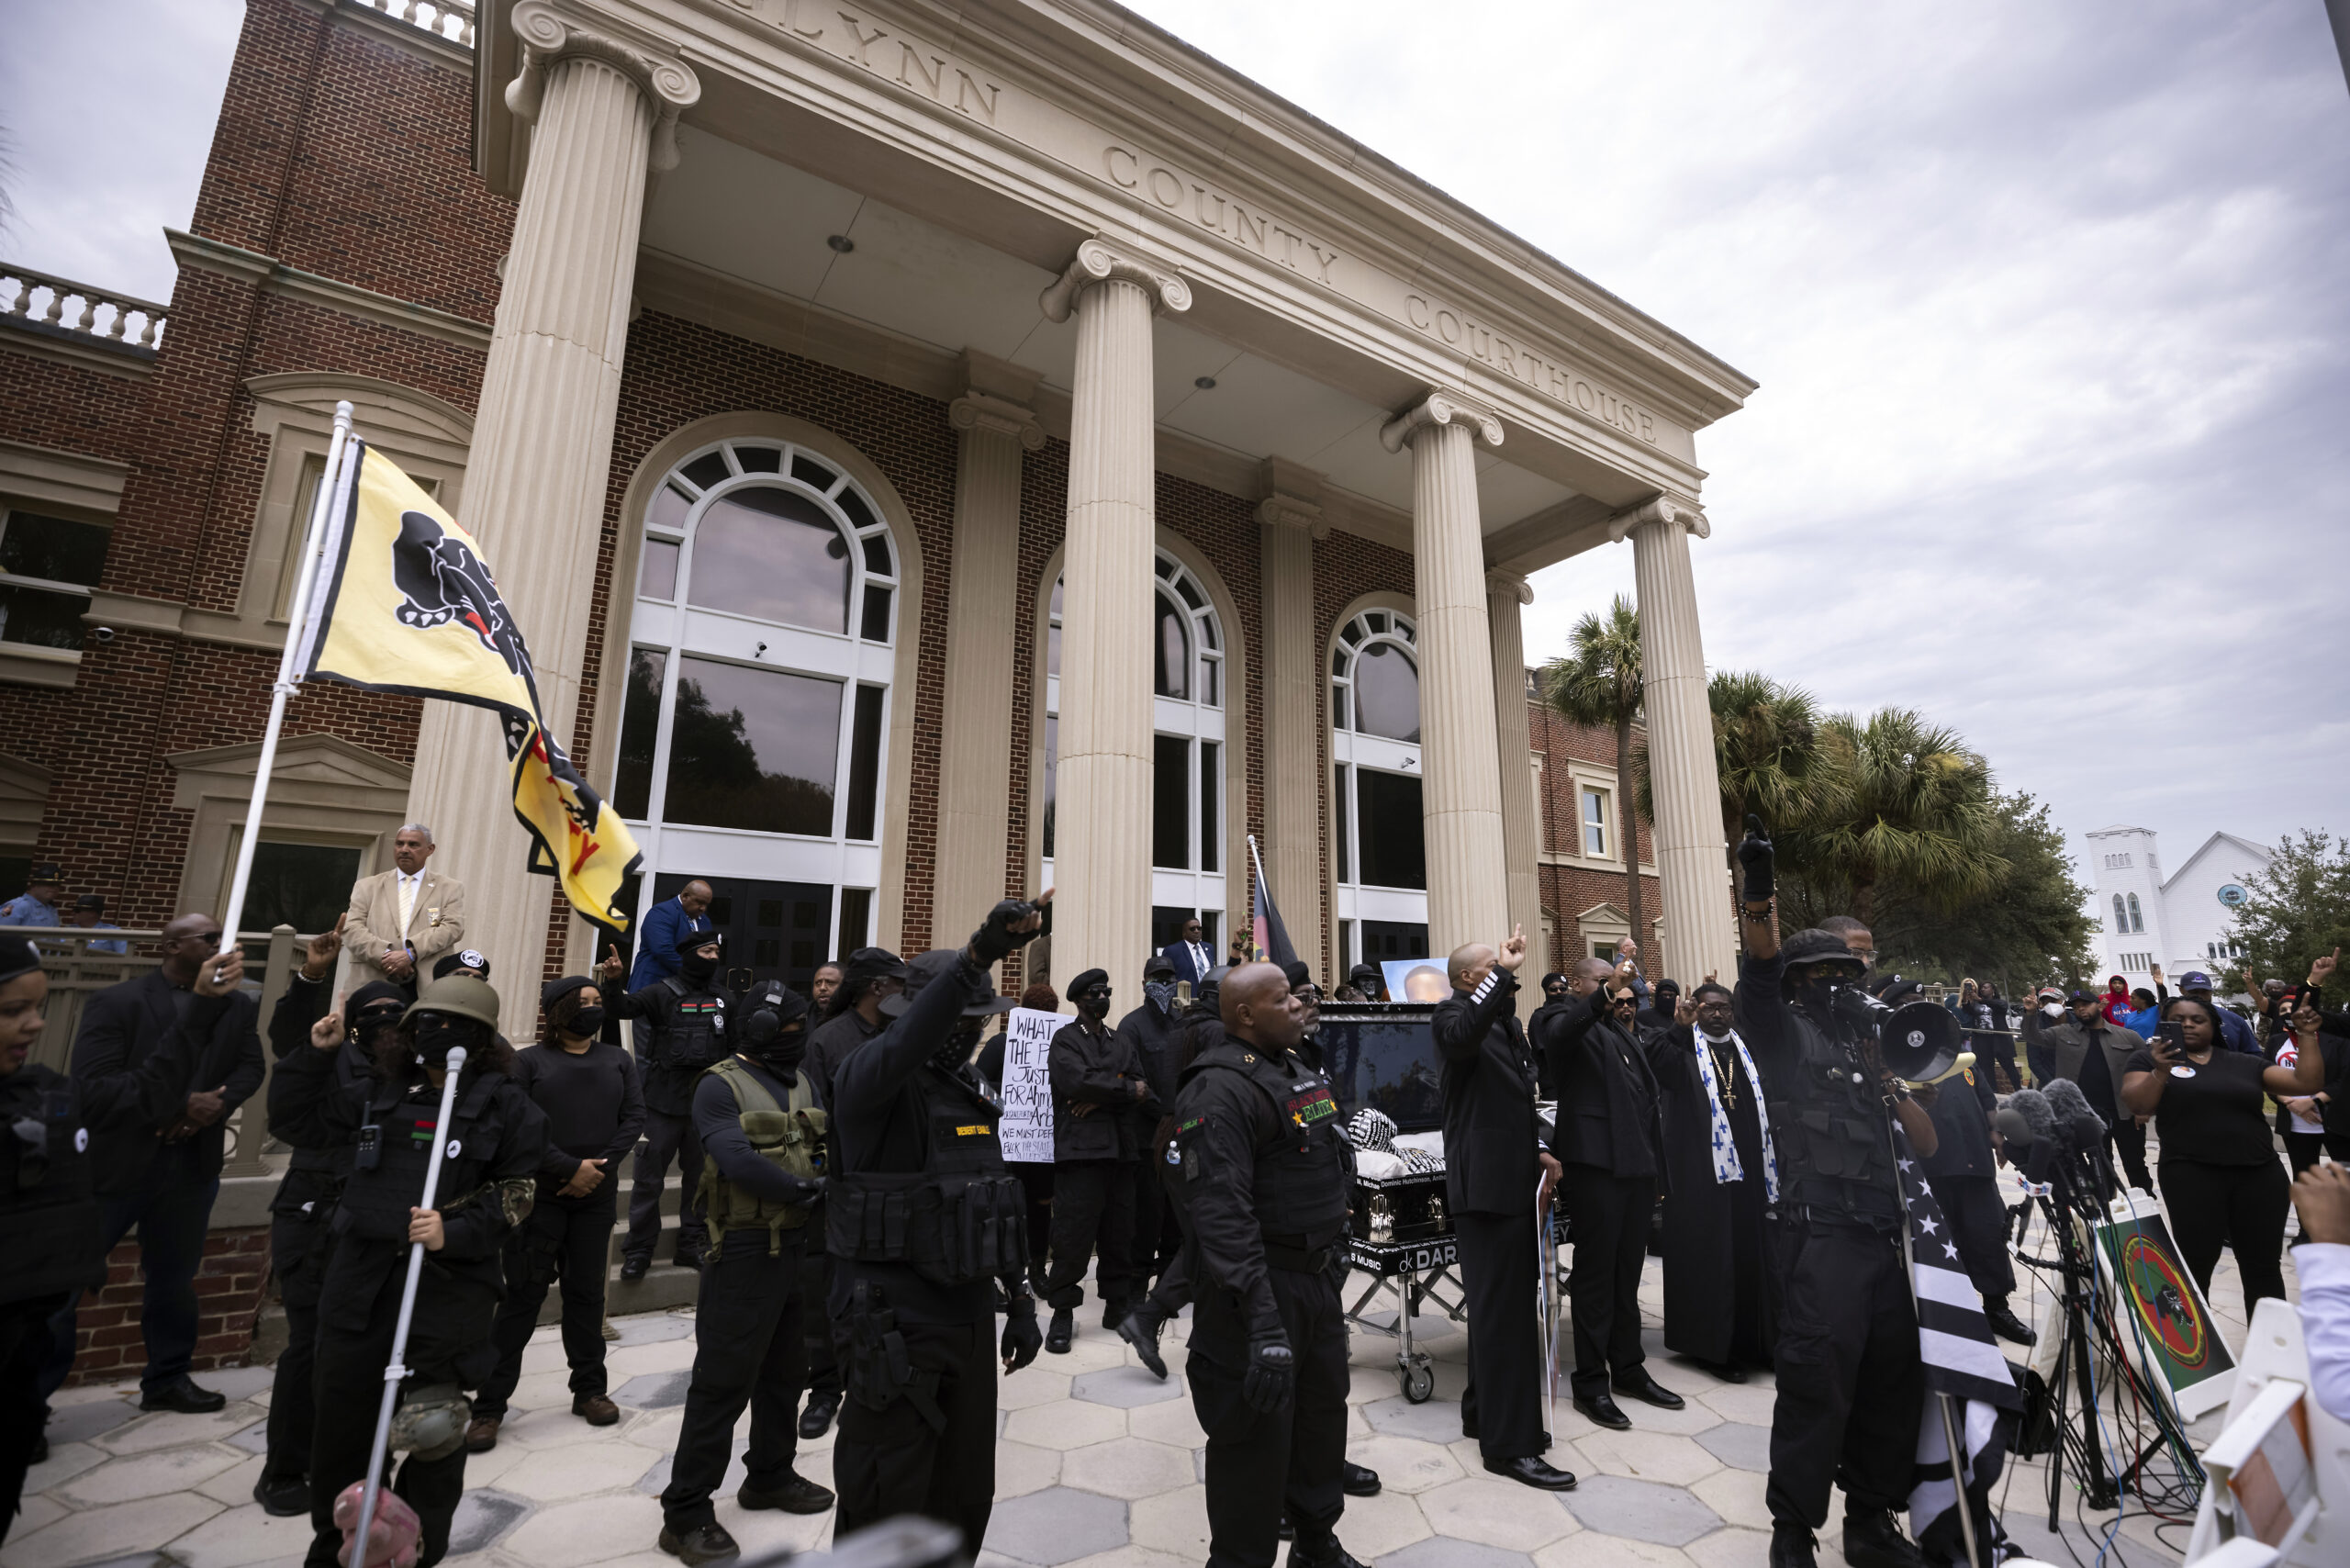 Dozens of Black Lives Matter and Black Panther protesters gather outside the Glynn County Courthouse where the trial of Travis McMichael, his father, Gregory McMichael, and William "Roddie" Bryan is held, Monday, Nov. 22, 2021, in Brunswick, Ga. The three men charged with the February 2020 slaying of 25-year-old Ahmaud Arbery. (AP Photo/Stephen B. Morton)